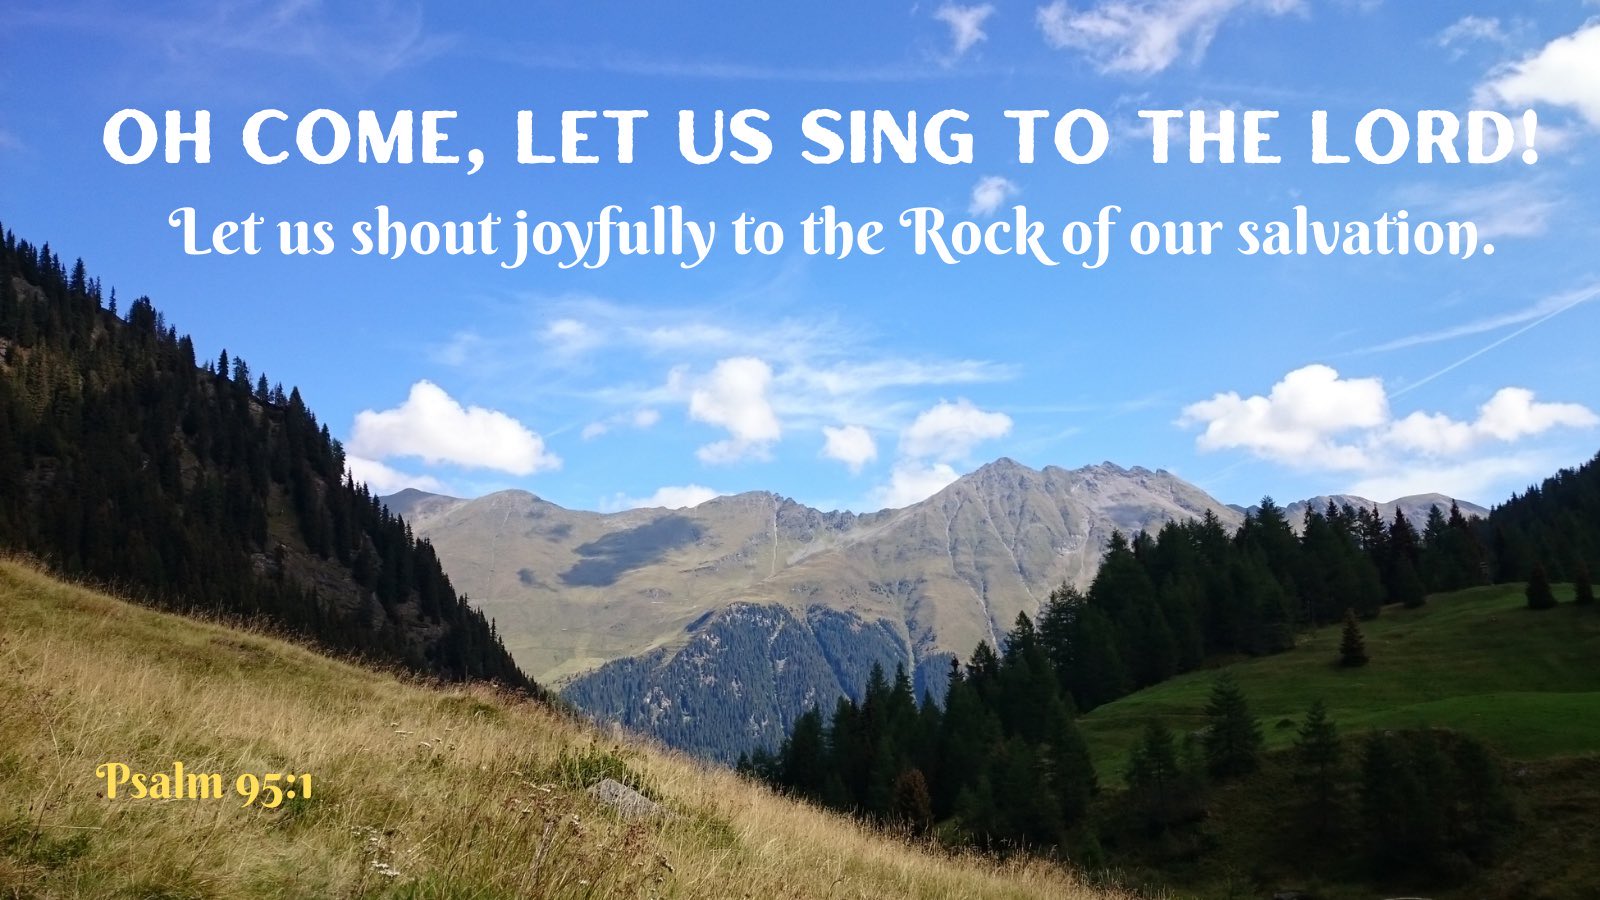 OH COME, LET US SING TO THE LORDI Let us shout joyfully to the Rock of our salvation. Psalm 95:1